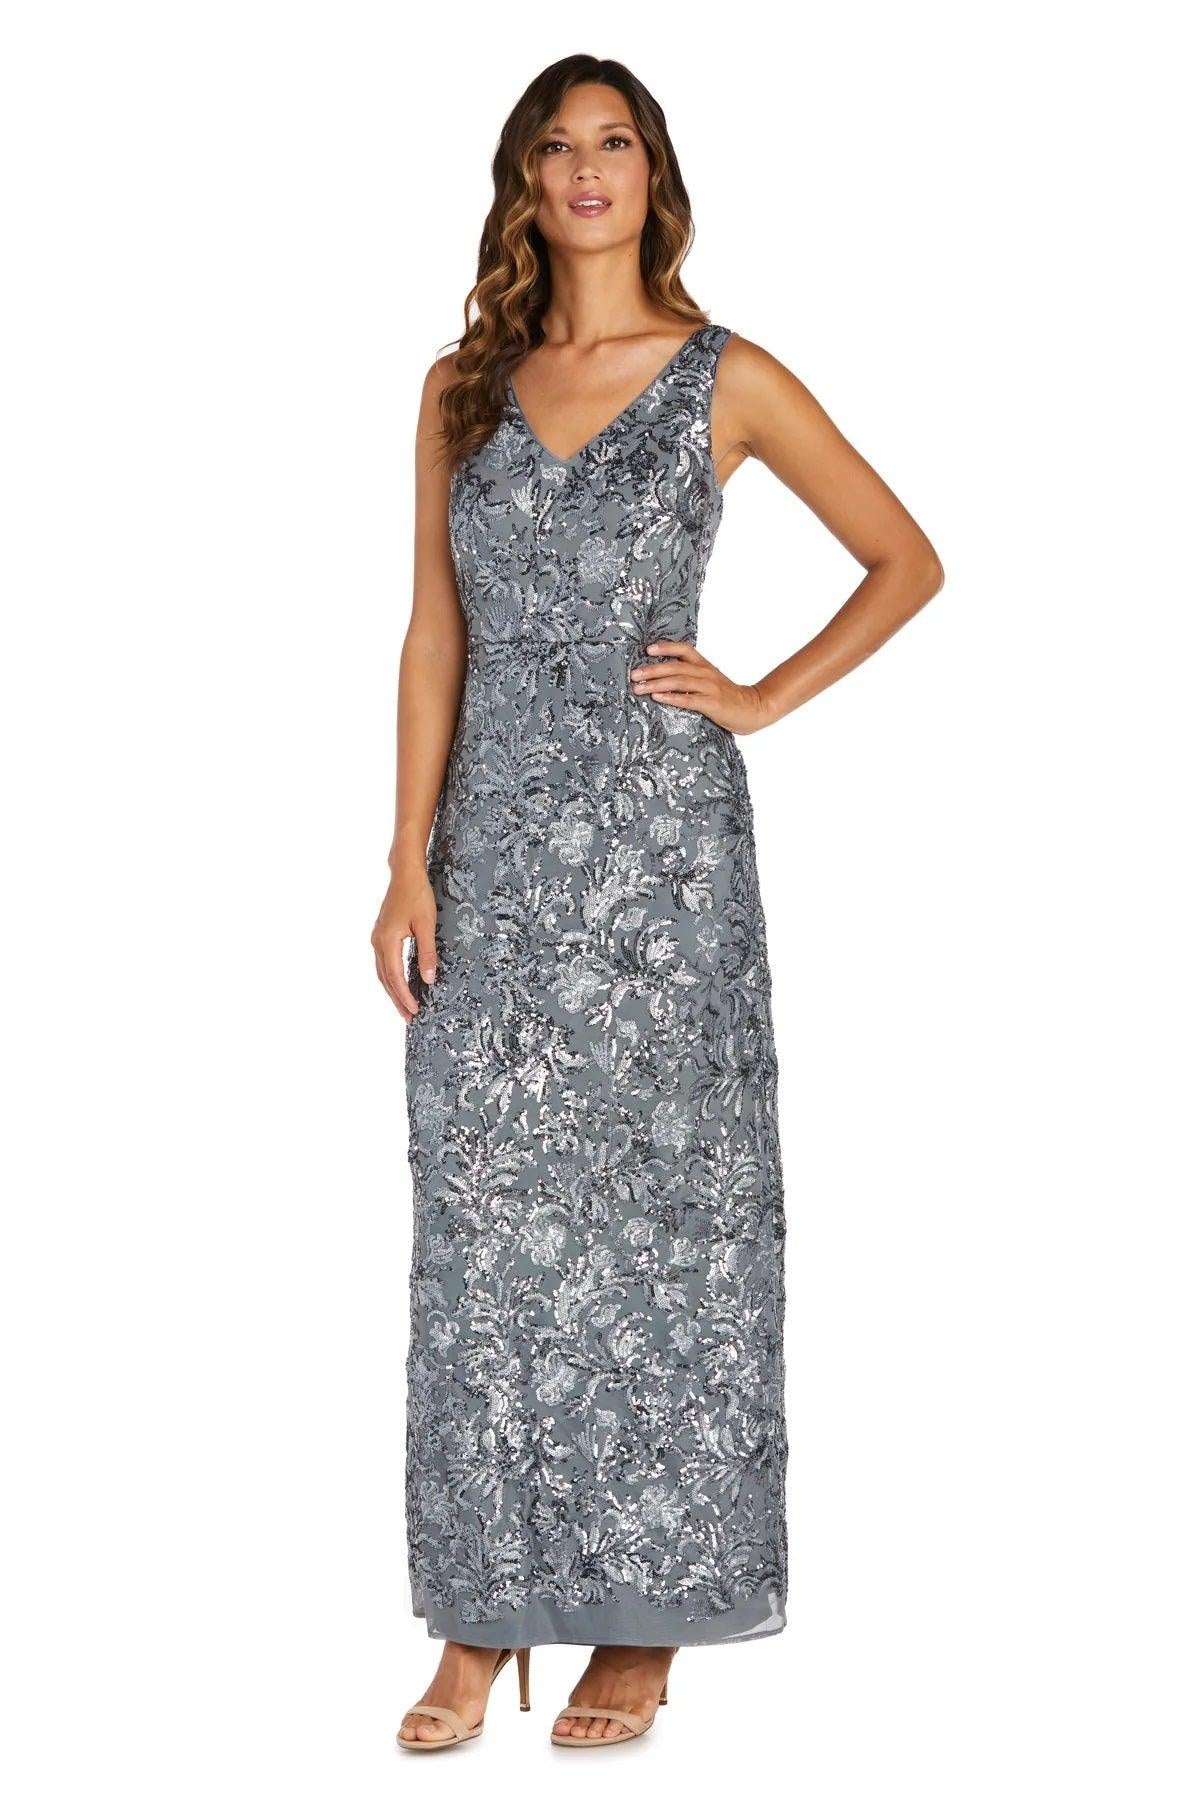 R&M Richards Long Mother of the Bride Dress 9171 - The Dress Outlet